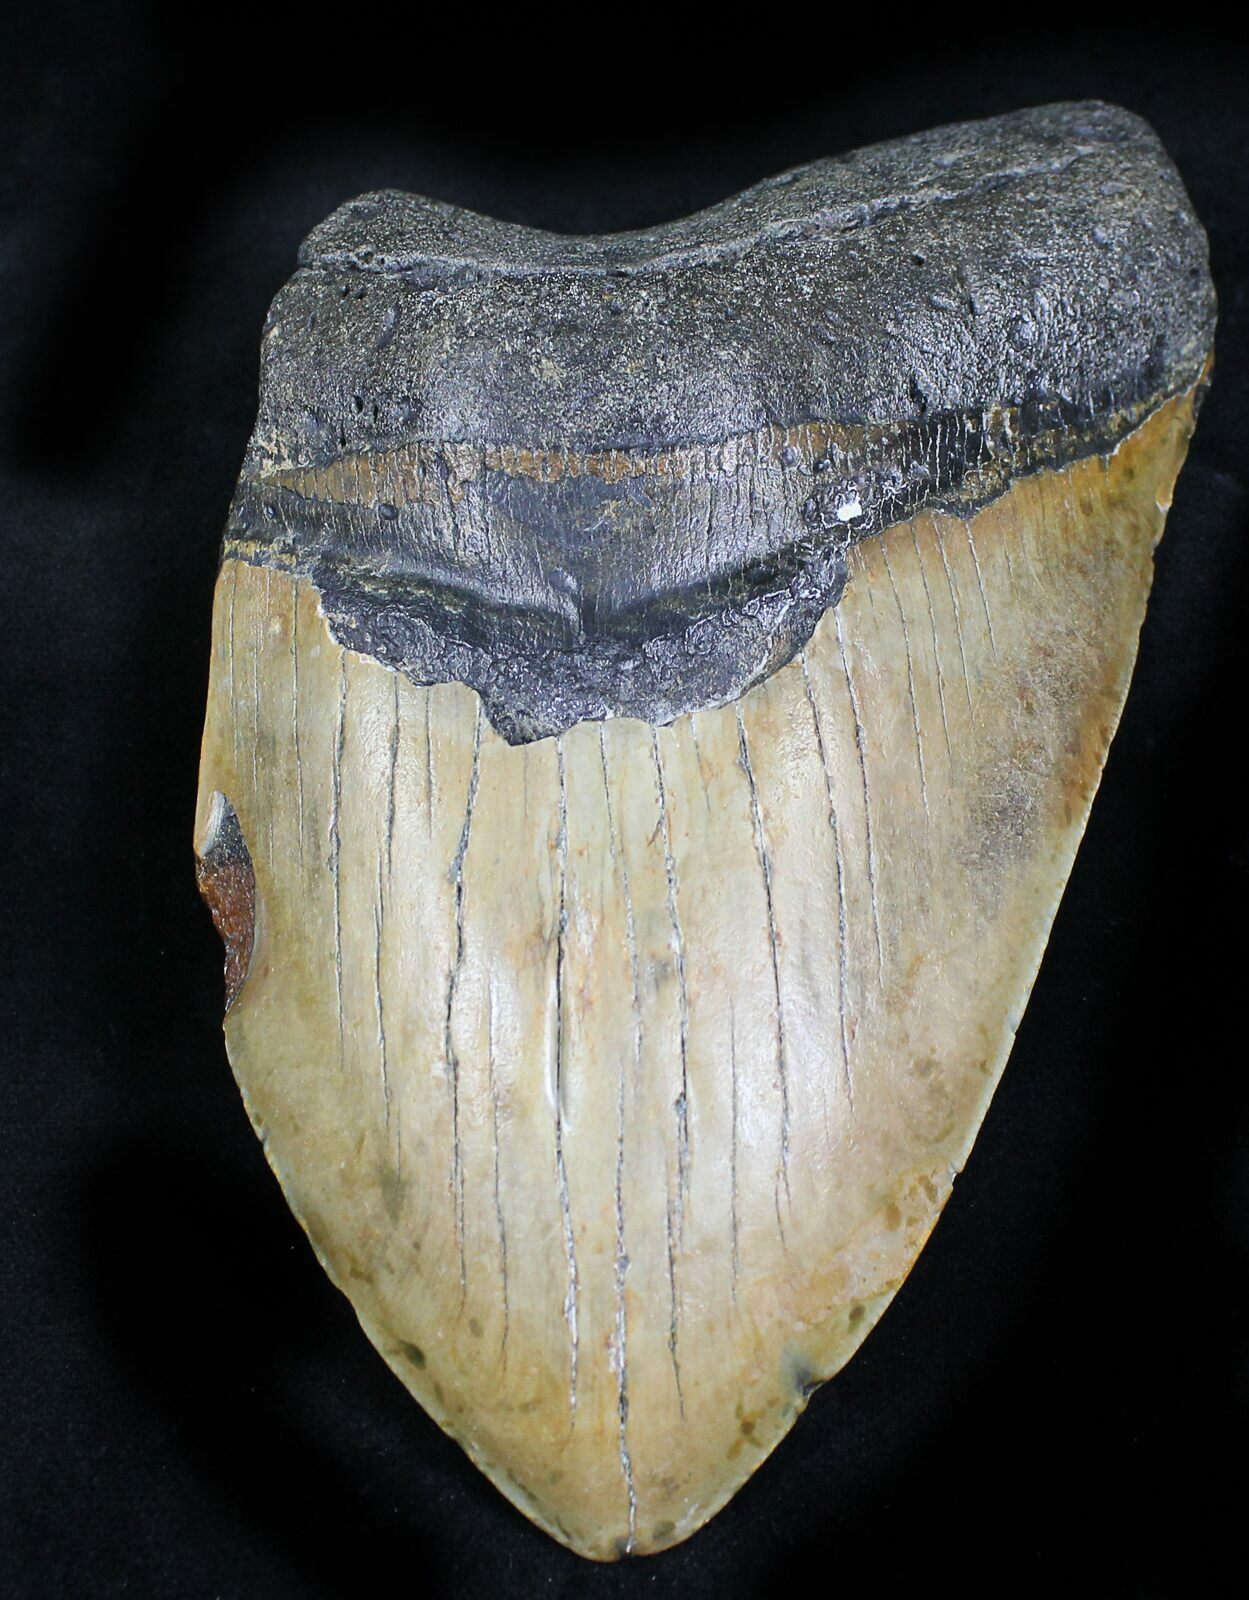 Partial 6.29" Megalodon Tooth - Monster Tooth! For Sale (#21943